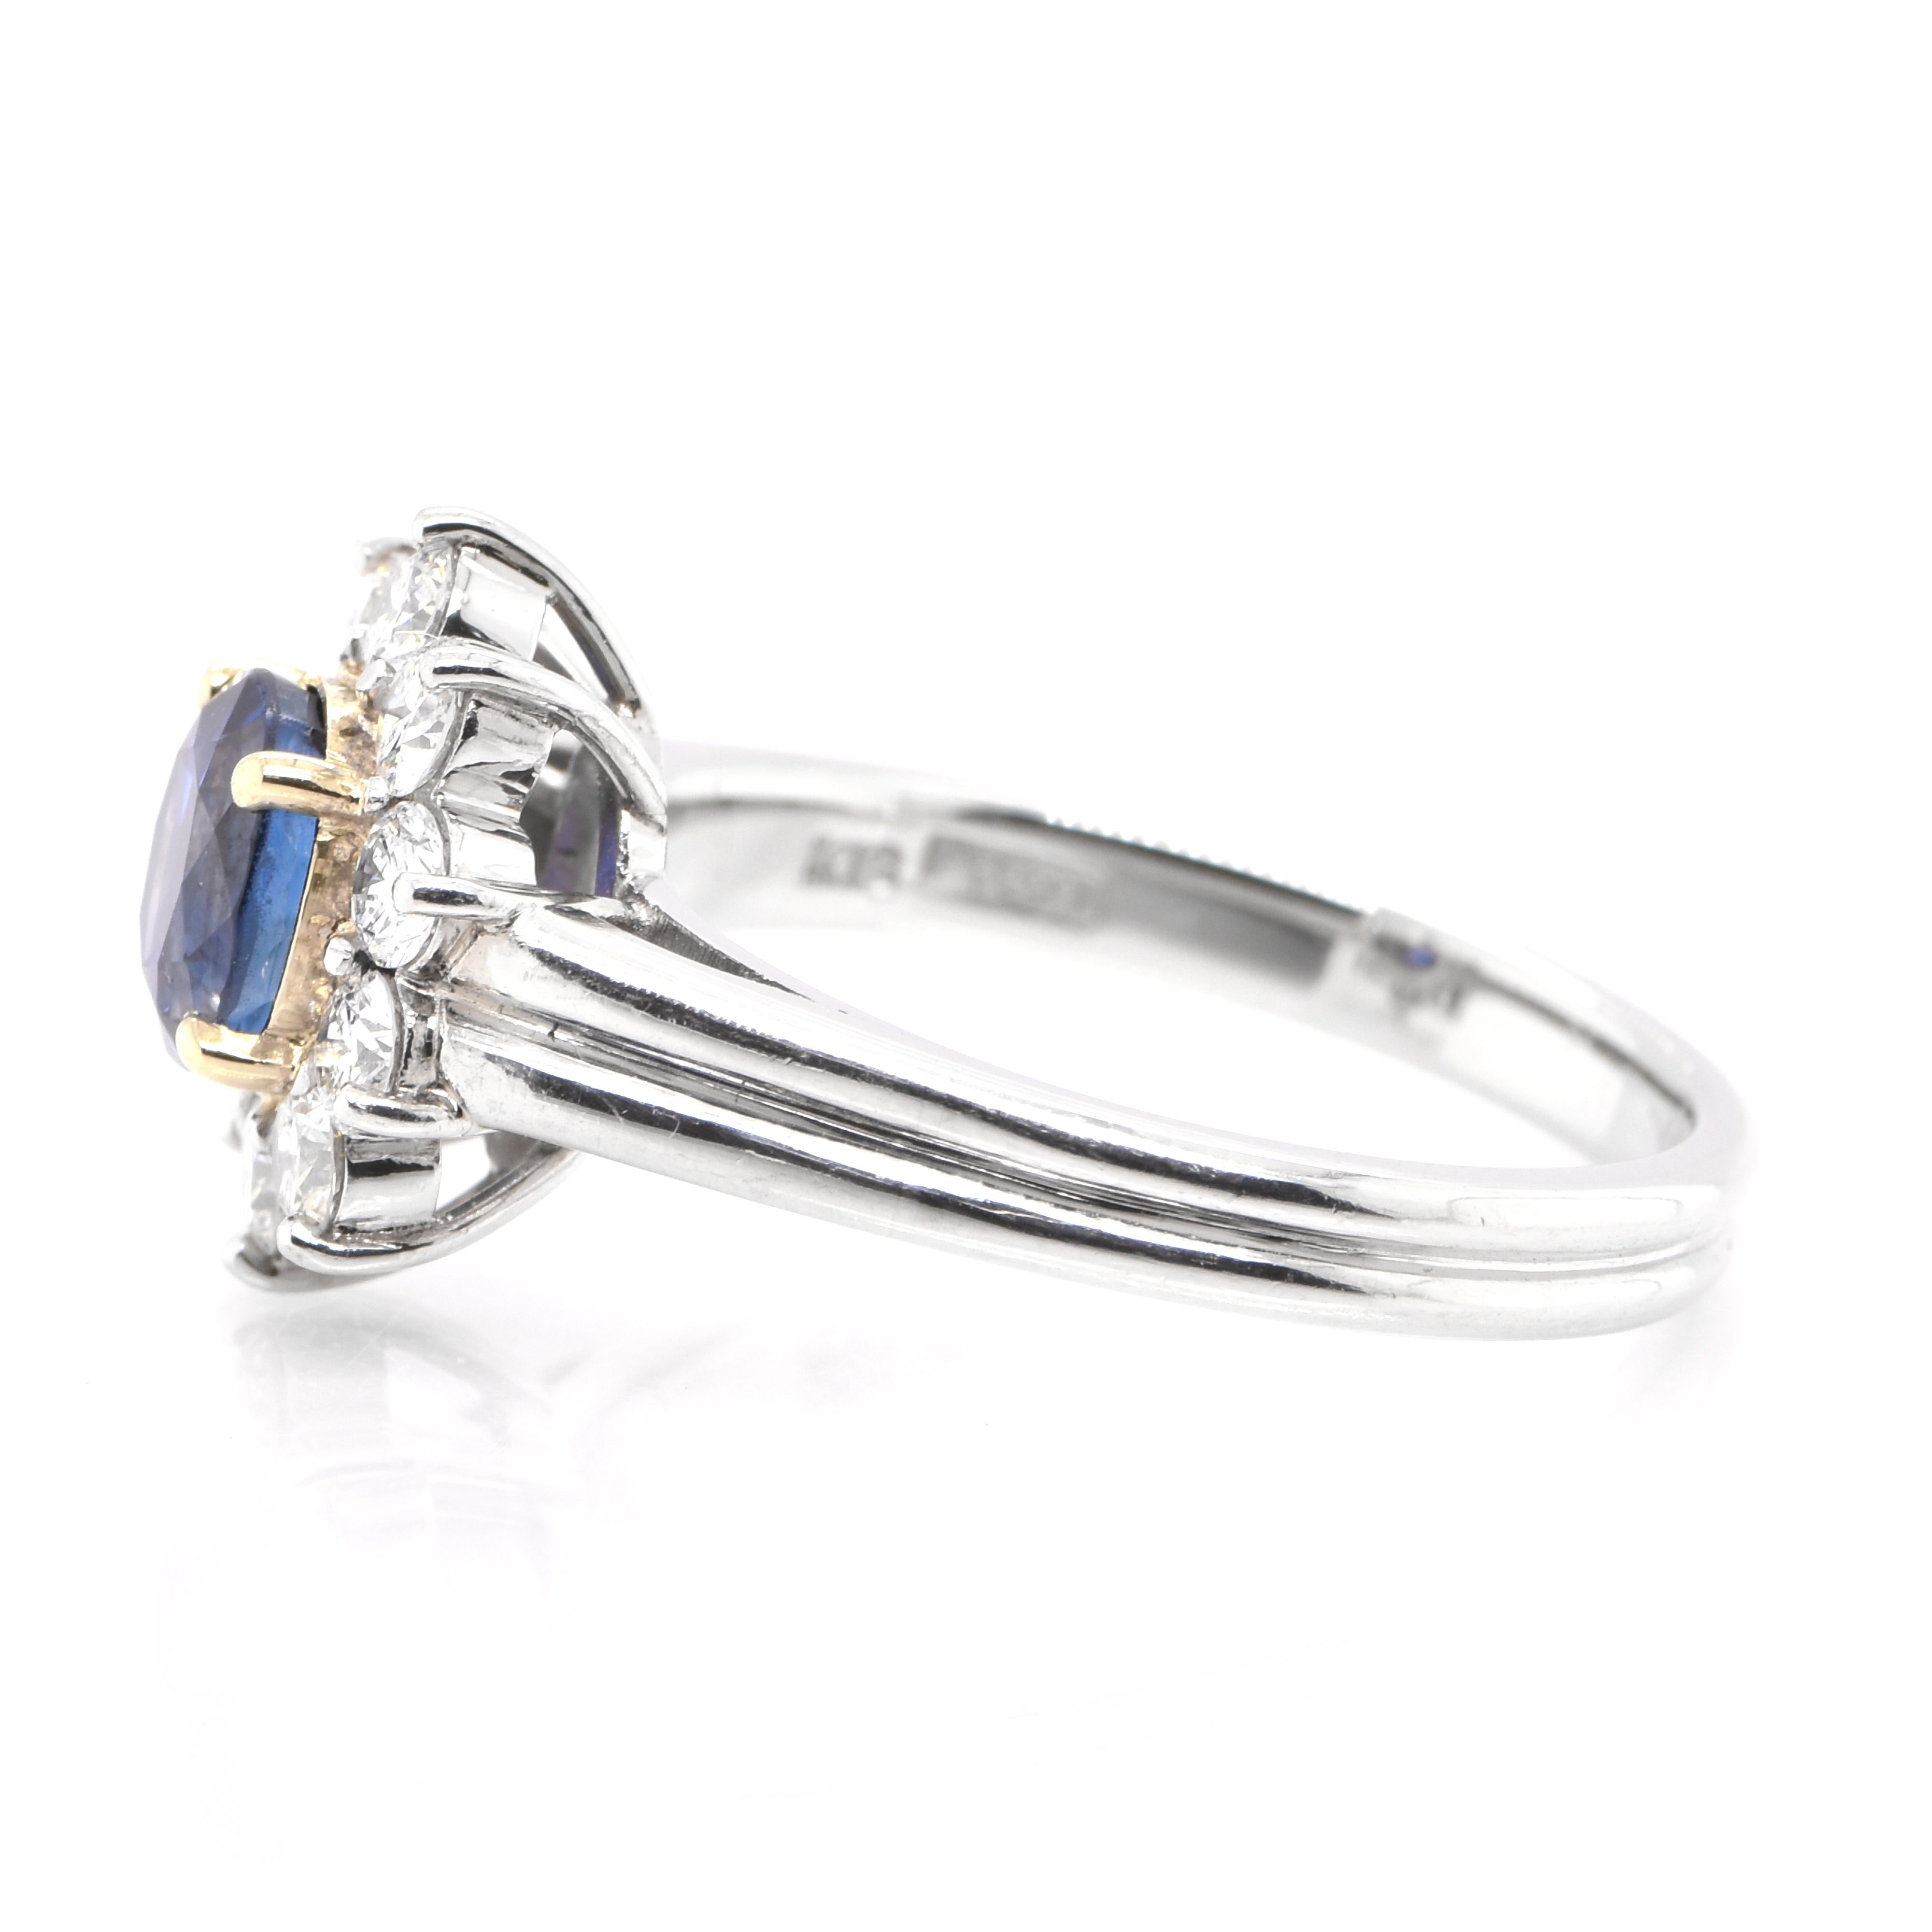 Oval Cut 1.53 Carat Natural Blue Sapphire & Diamond Ring Set in Platinum and 18K Gold